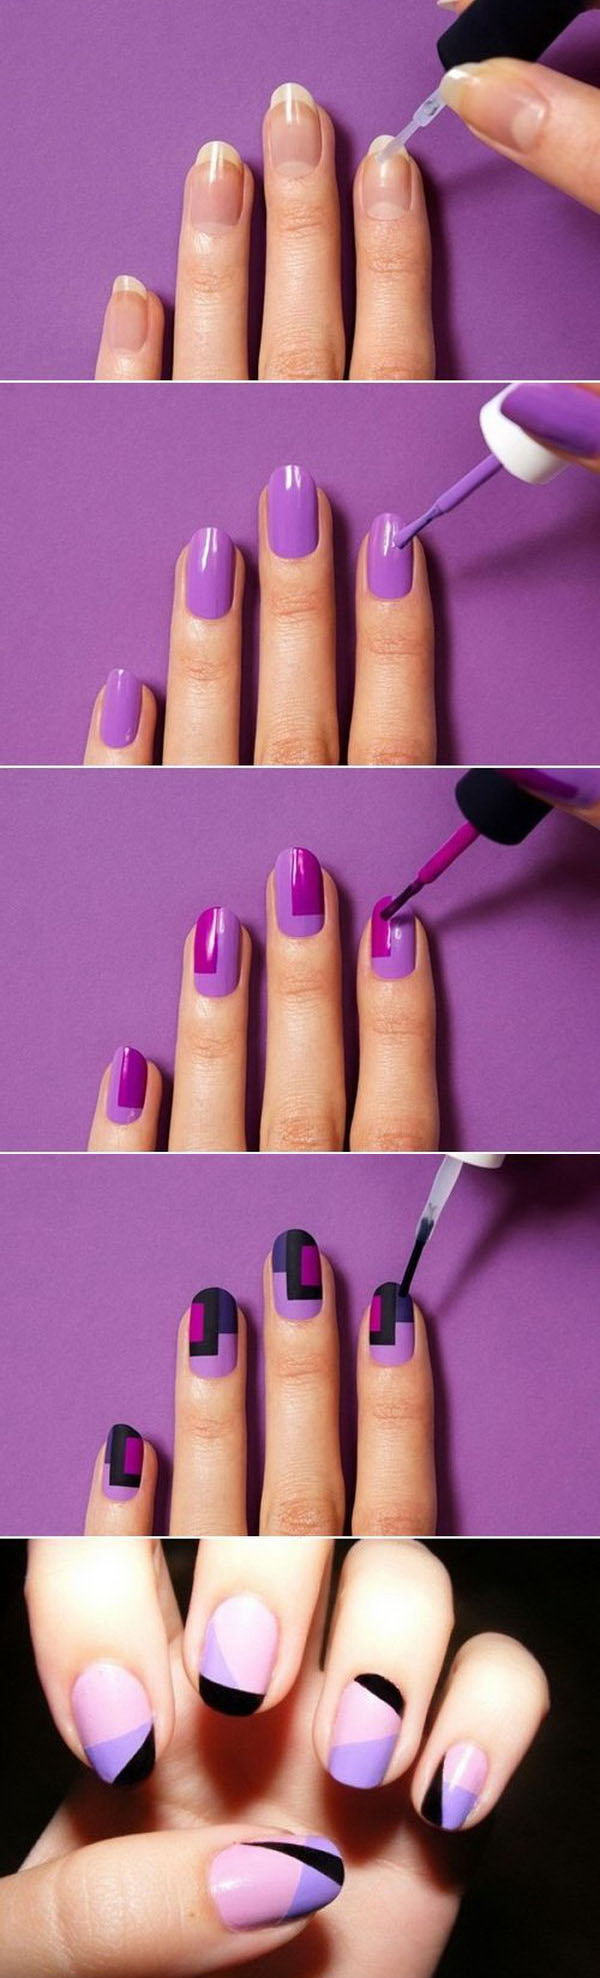 20+ Easy and Fun Step by Step Nail Art Tutorials | Styletic